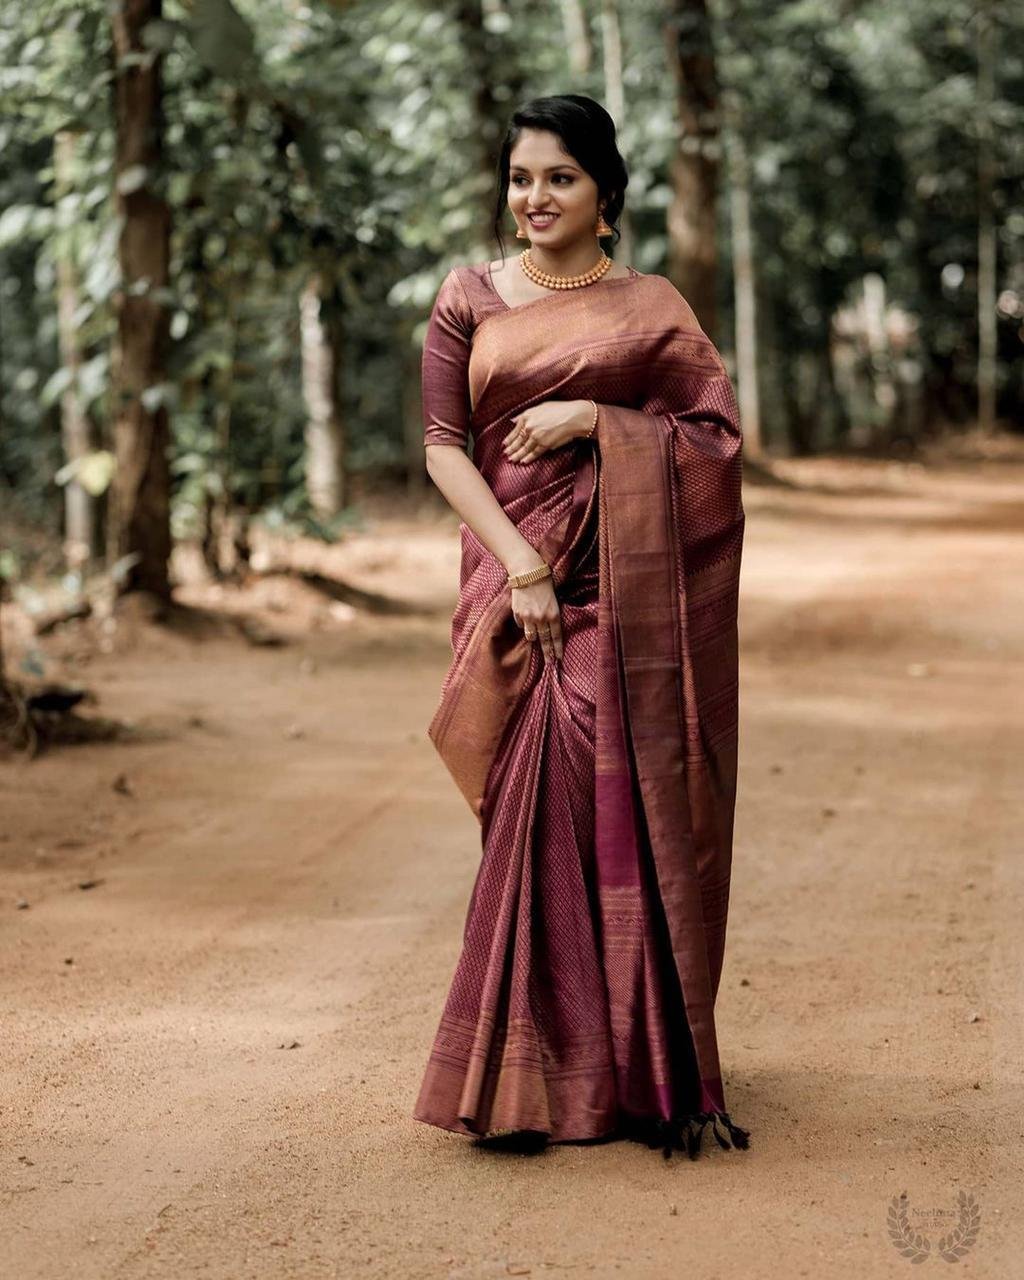 Where can I shop for silk sarees online? - Quora